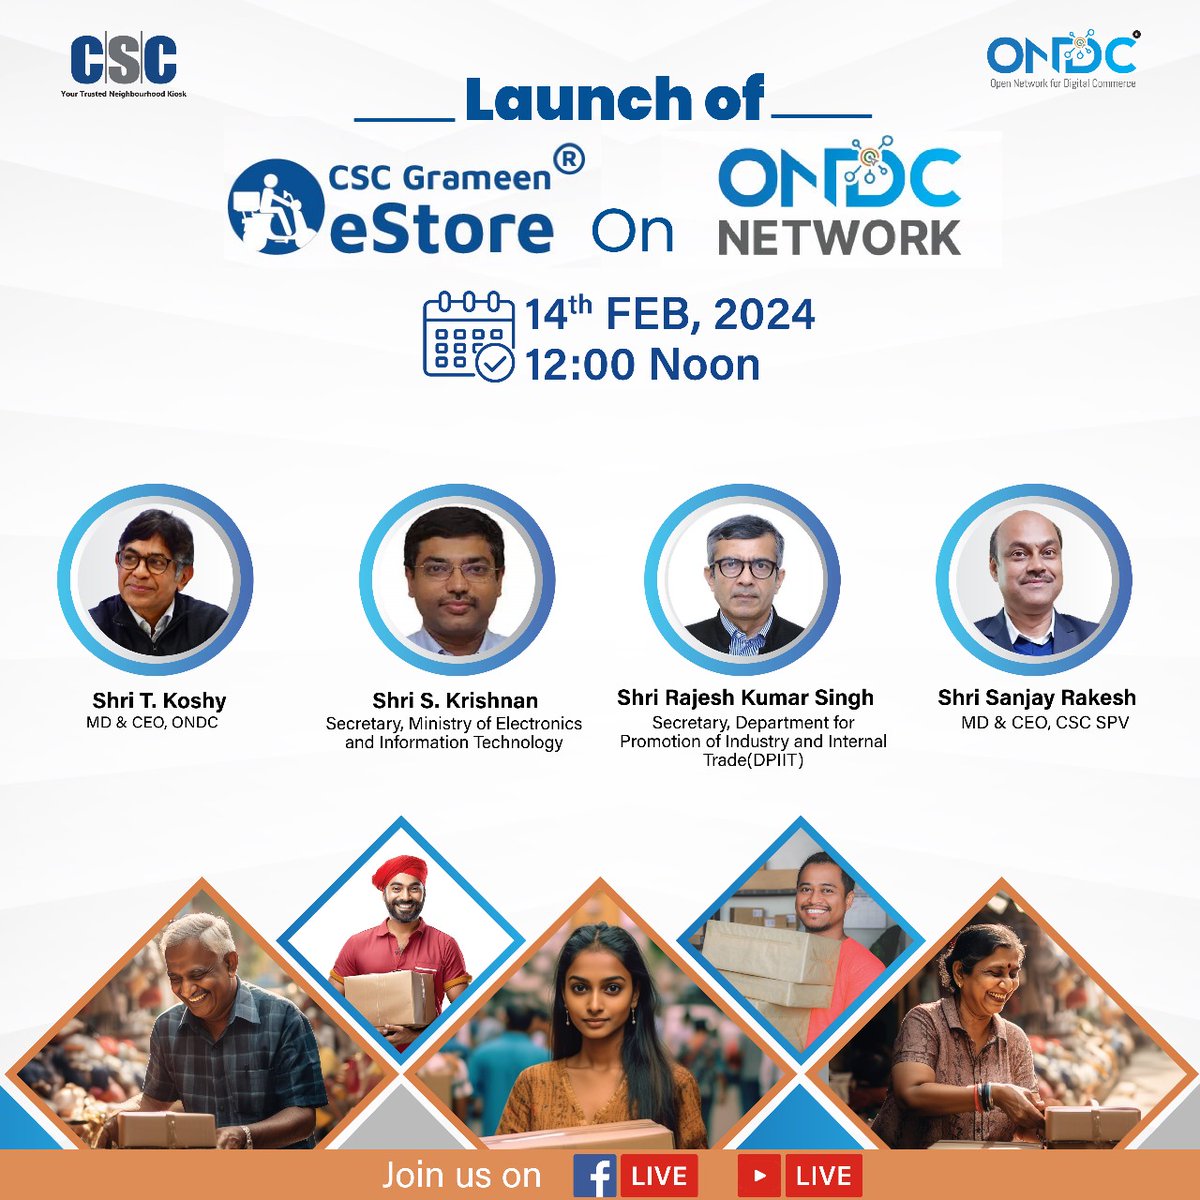 We are happy to inform you the Launch of #CSCGrameeneStore on #ONDC Network Powering the Nation through Rural Digital eCommerce LIVE on the CSC Fb Page, on 14th February, 2024 (Wednesday) @12:00 PM on facebook.com/cscscheme/ @CSCegov_ @sanjaykrakesh @GoI_MeitY @ONDC_Official